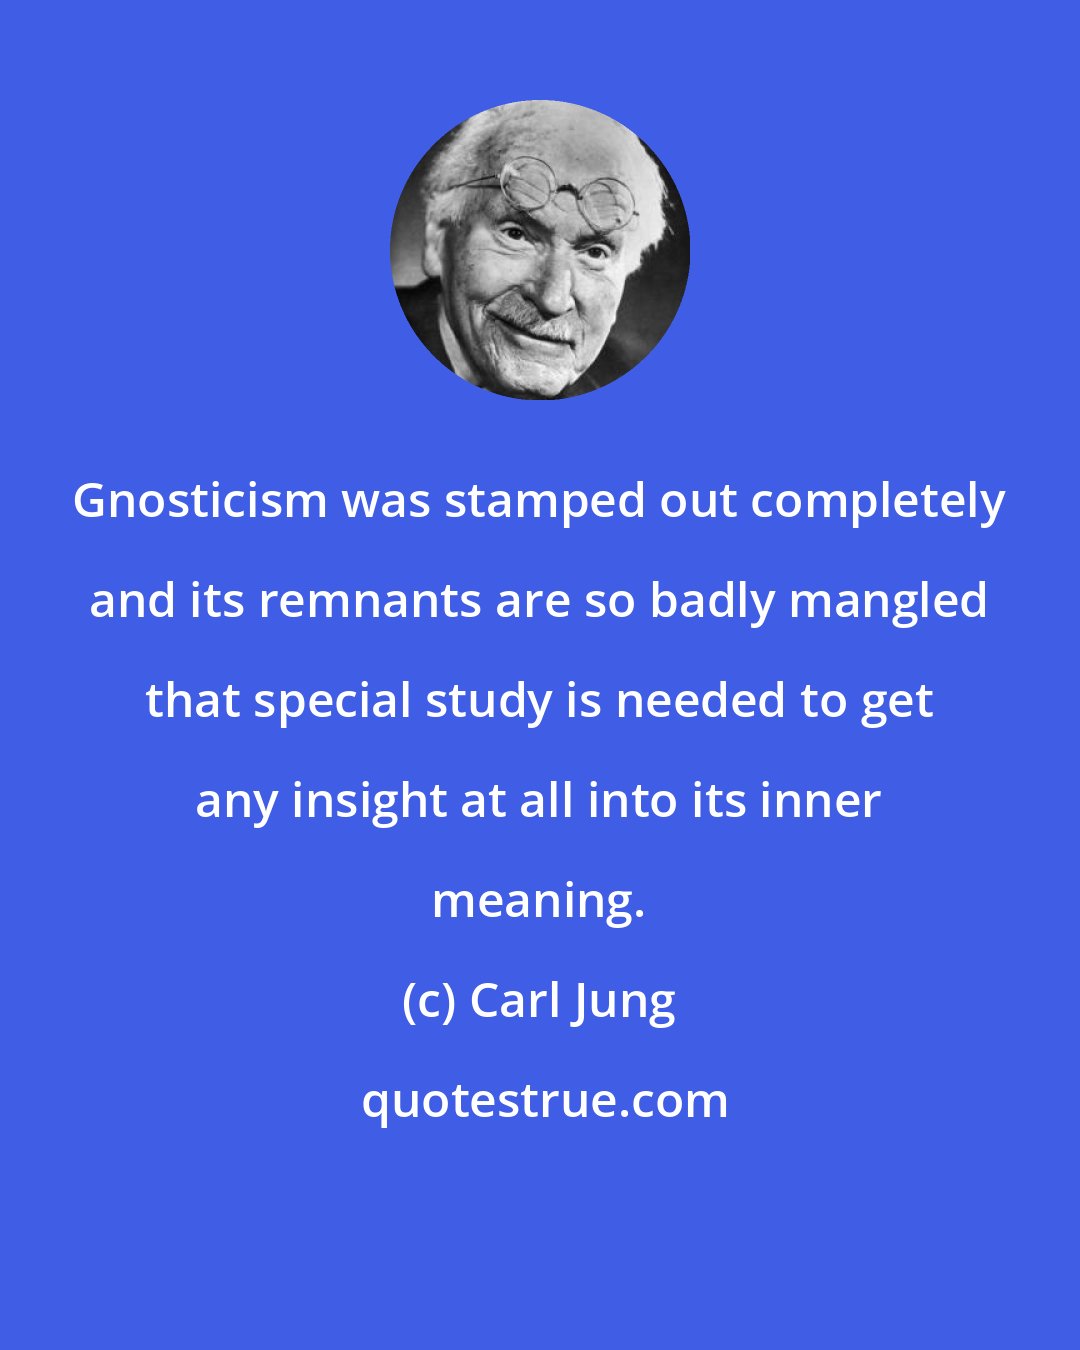 Carl Jung: Gnosticism was stamped out completely and its remnants are so badly mangled that special study is needed to get any insight at all into its inner meaning.